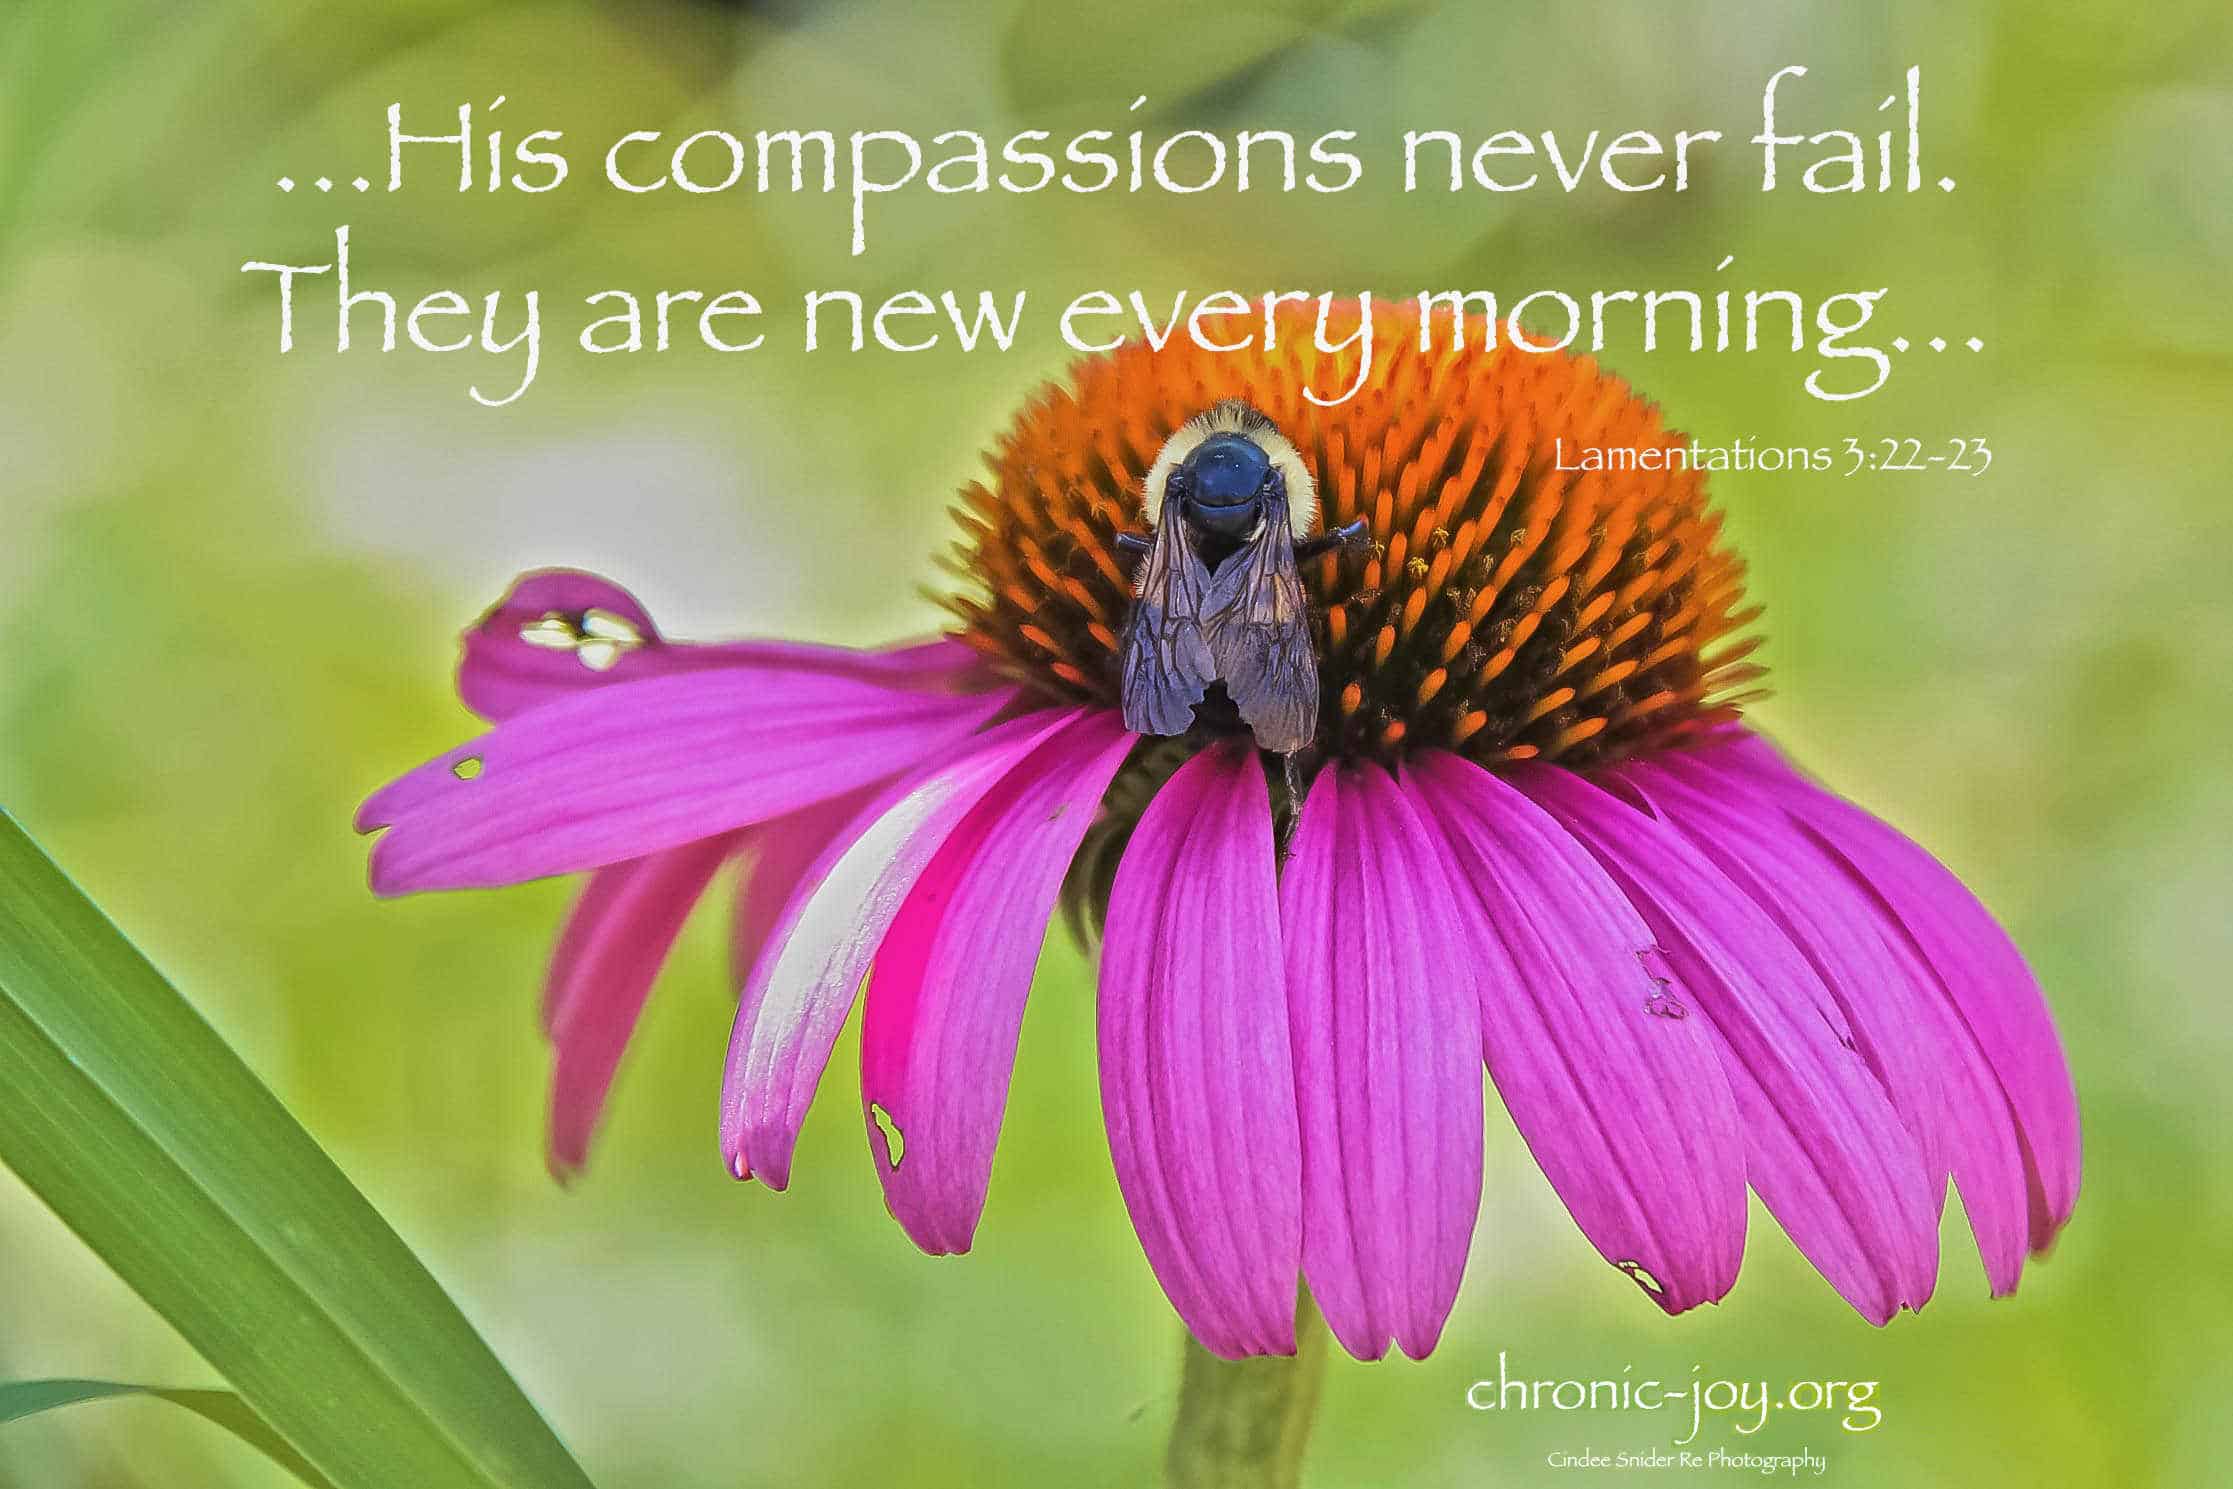 His compassions never fail. They are new every morning. (Lamentations 3:22-23)